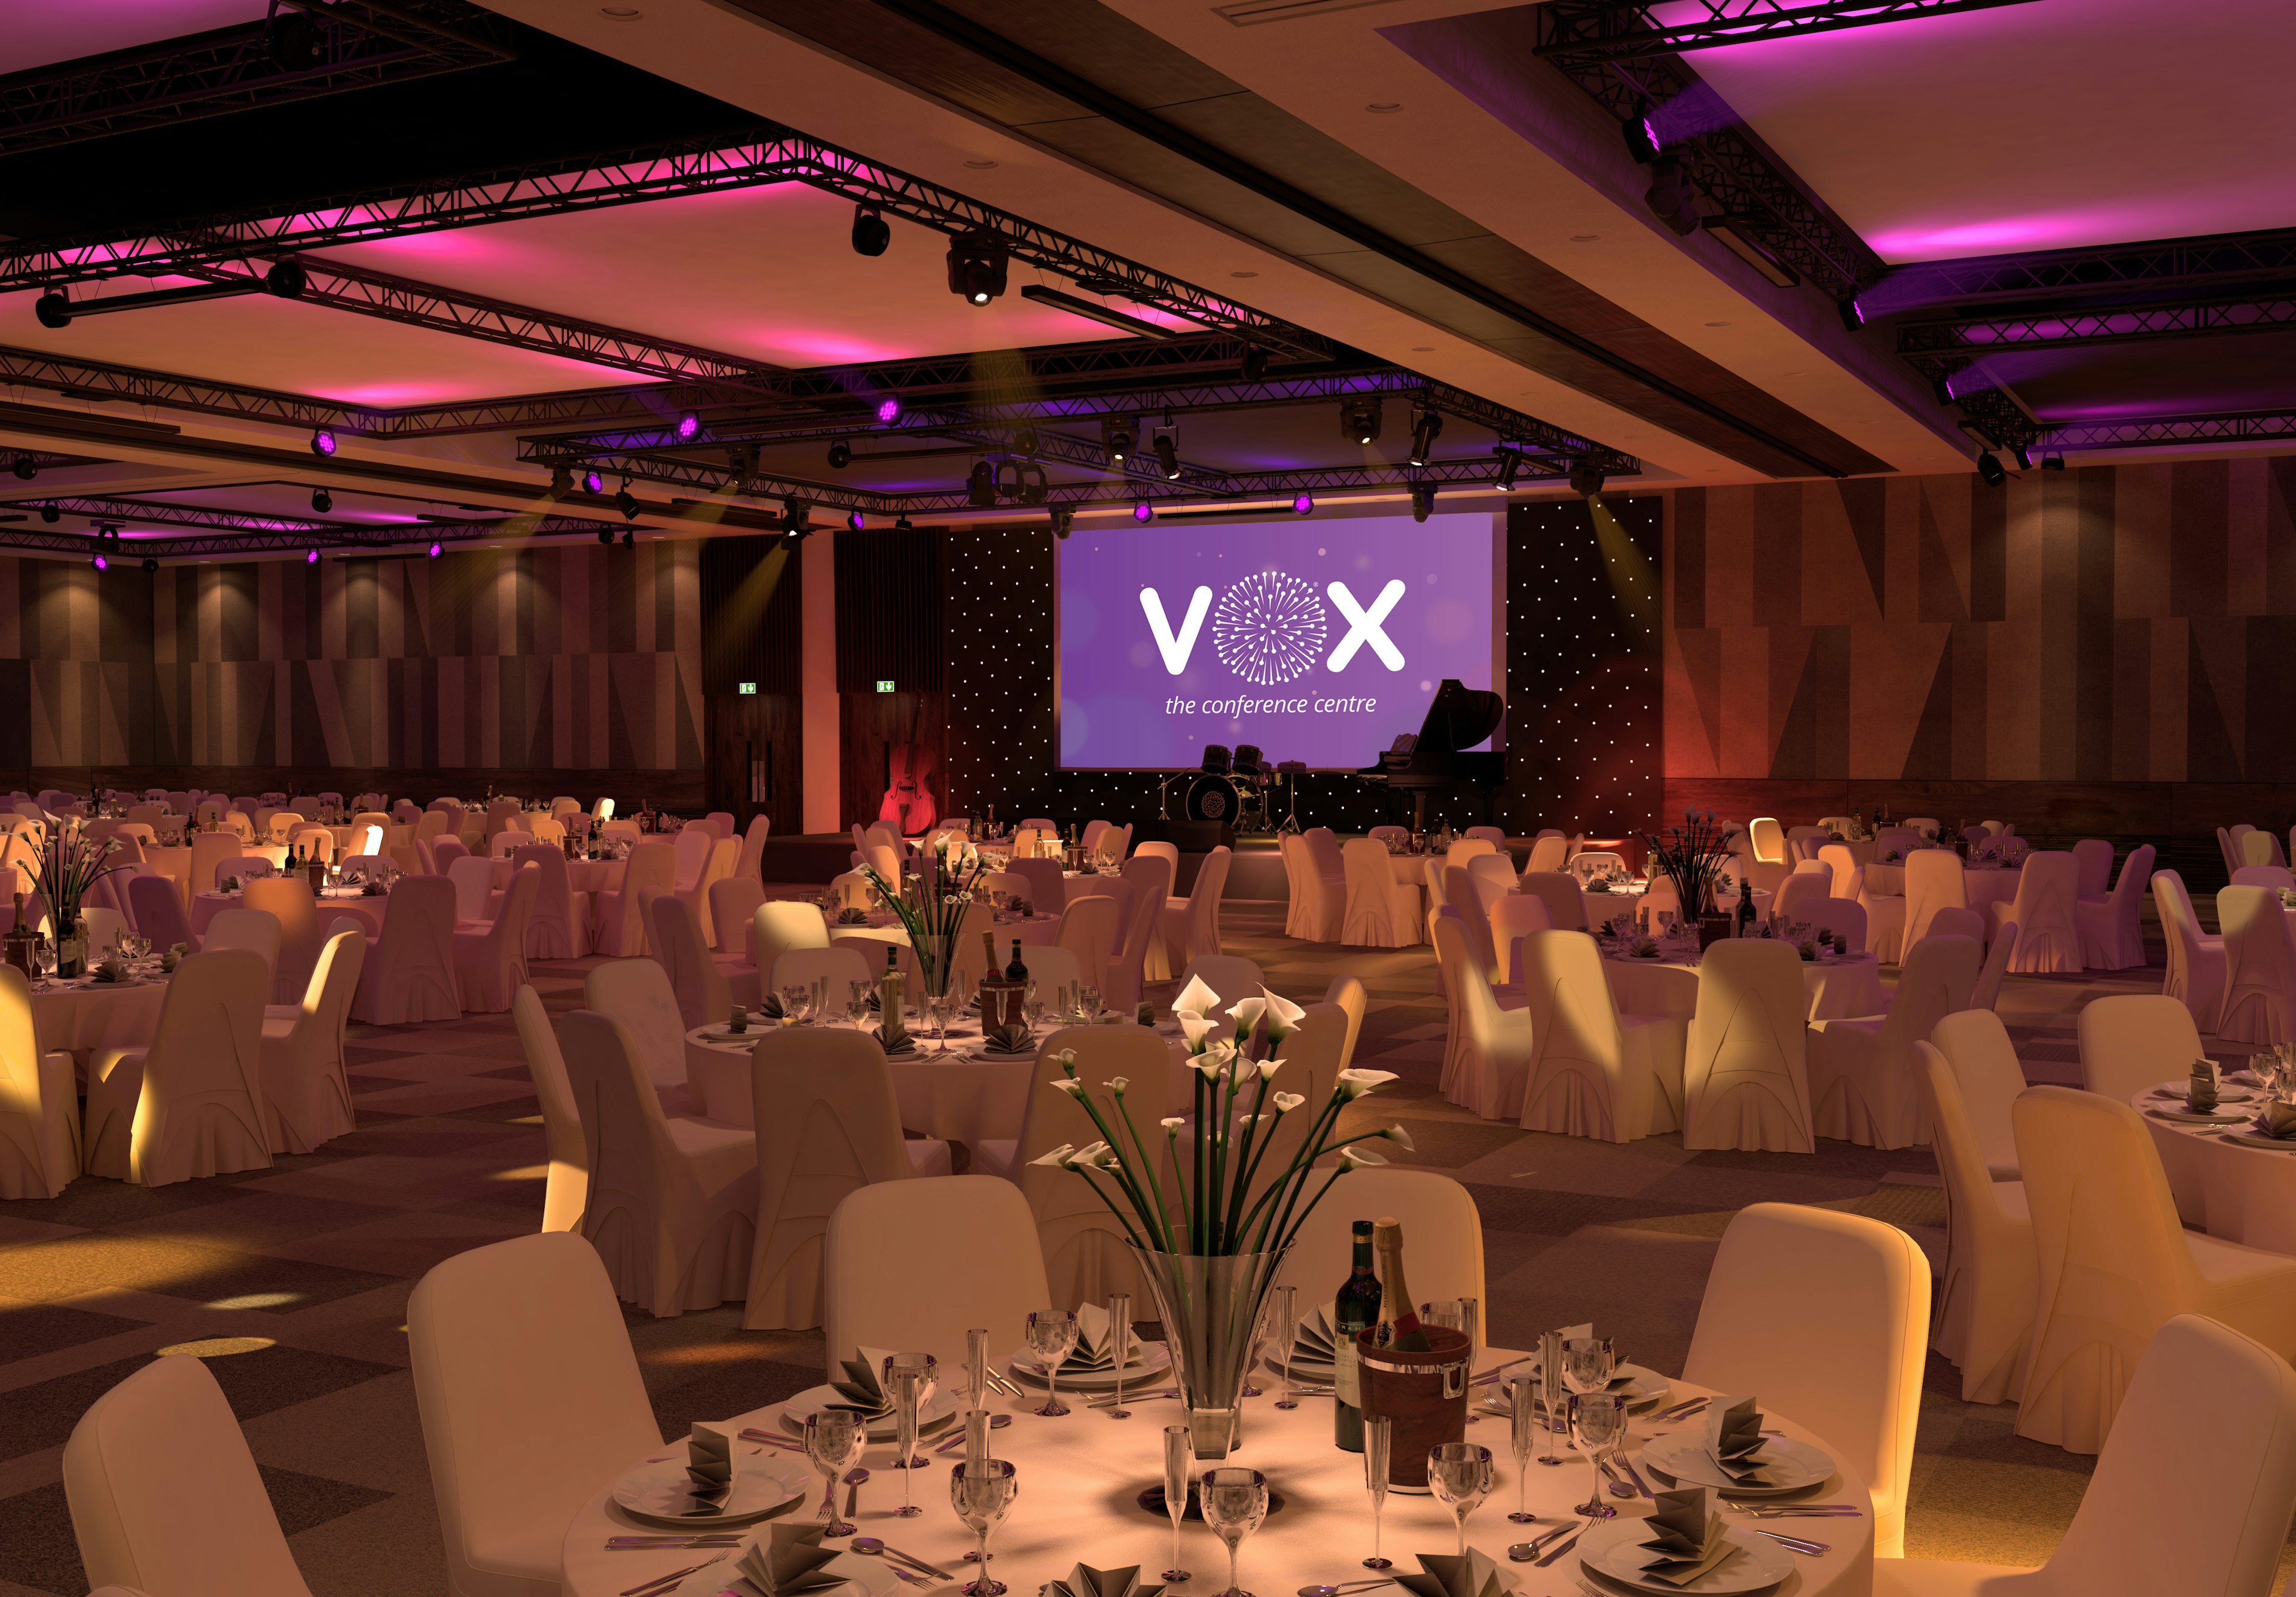 Weddings - The Vox Conference Centre